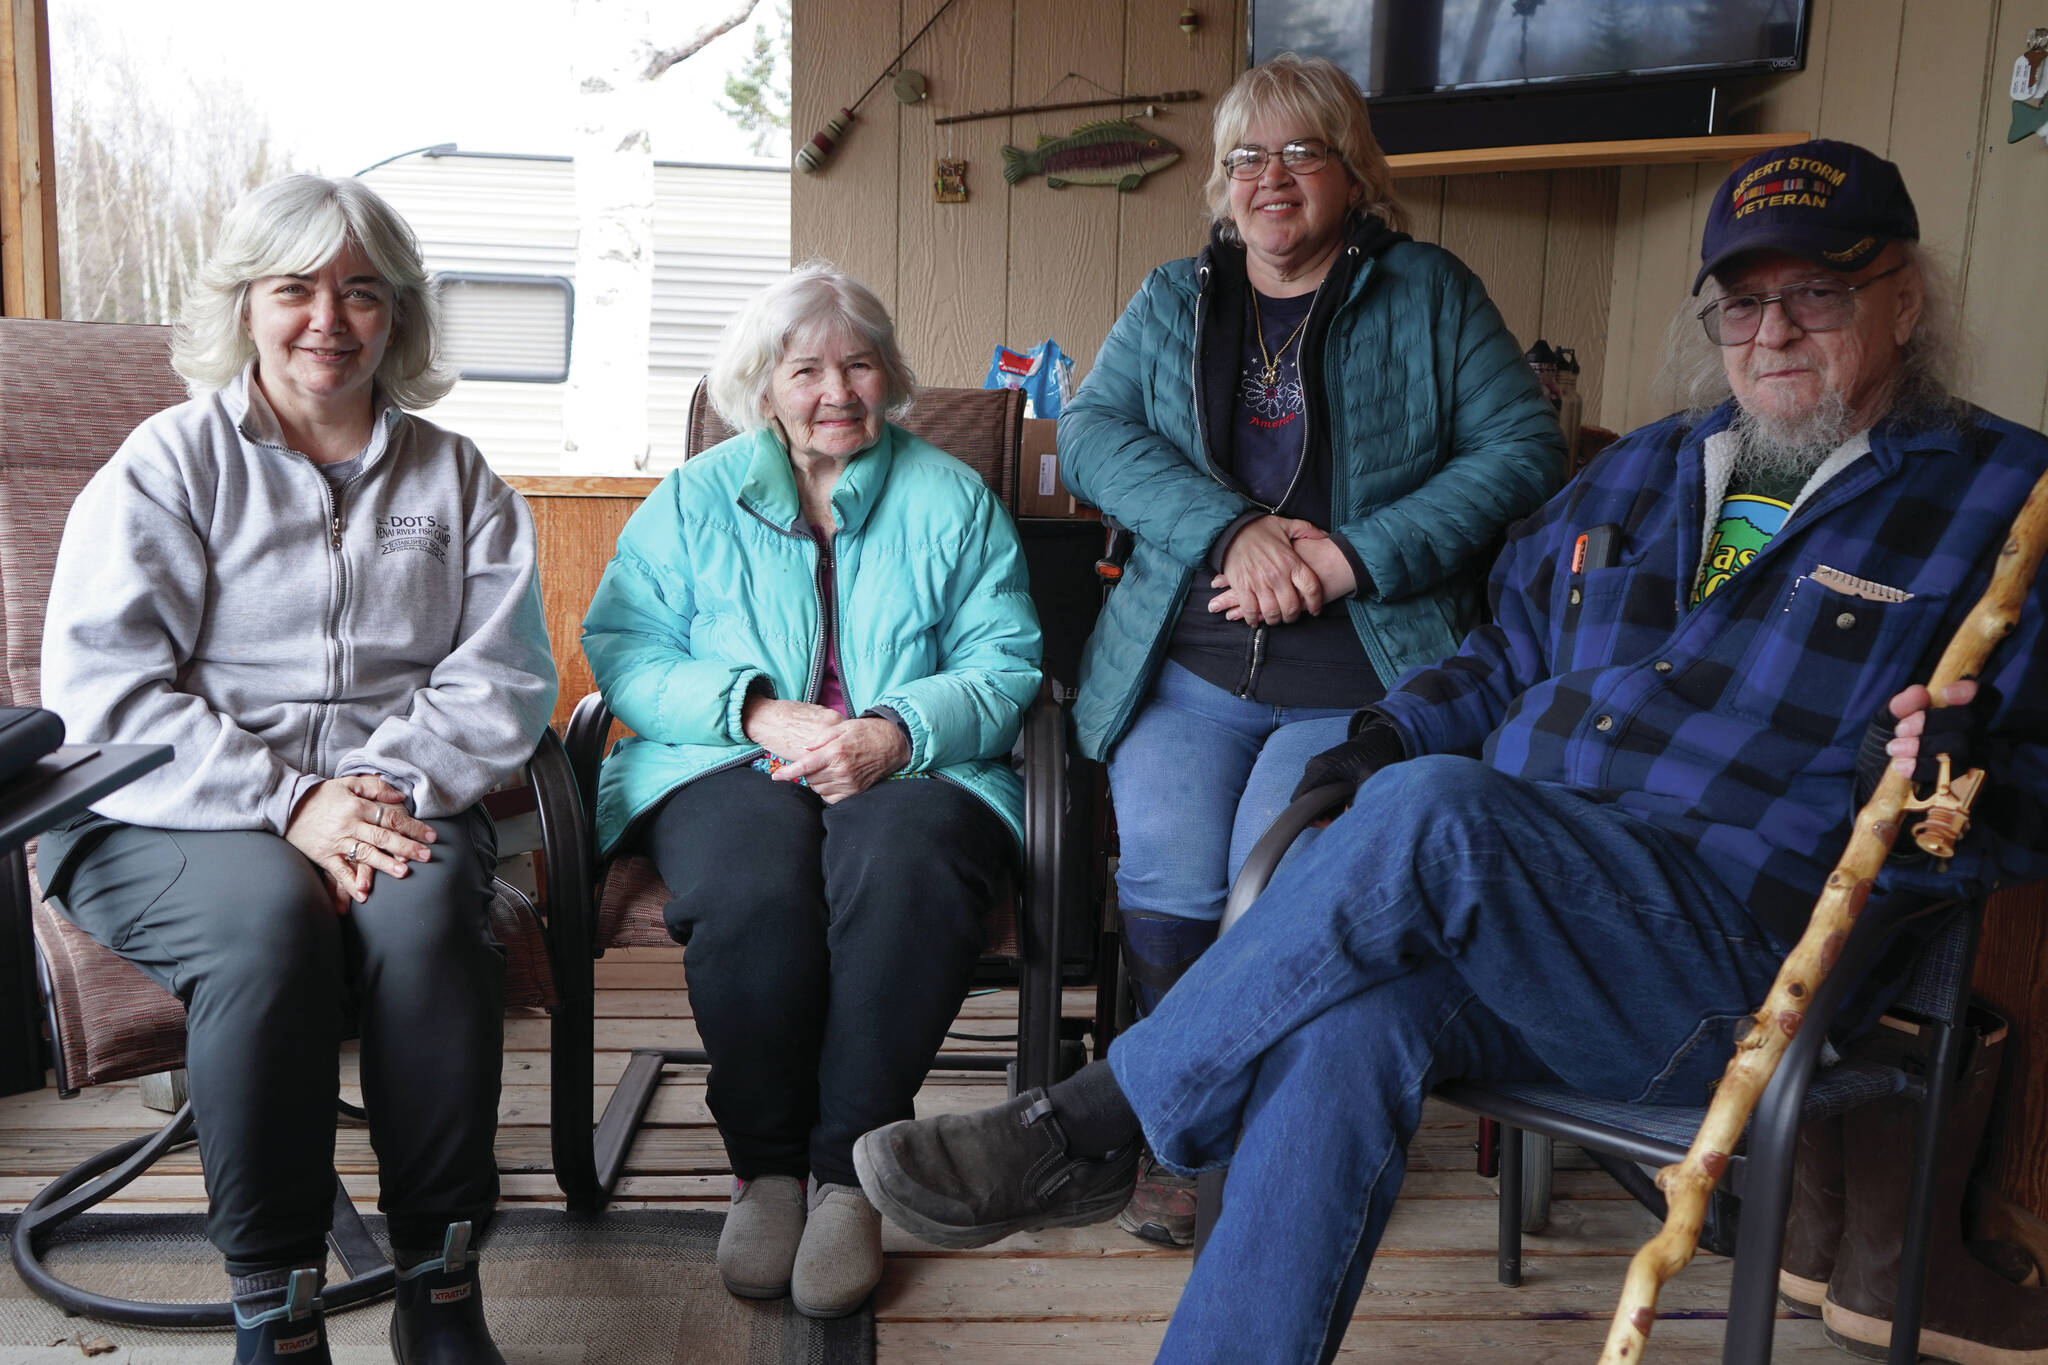 Jake Dye/Peninsula Clarion
From left: Donna Anderson, Betty Stephenson, Sue Stephenson and Eddie Thomas gather for a photo at Dot’s Kenai River Fish Camp in Sterling, on Saturday.